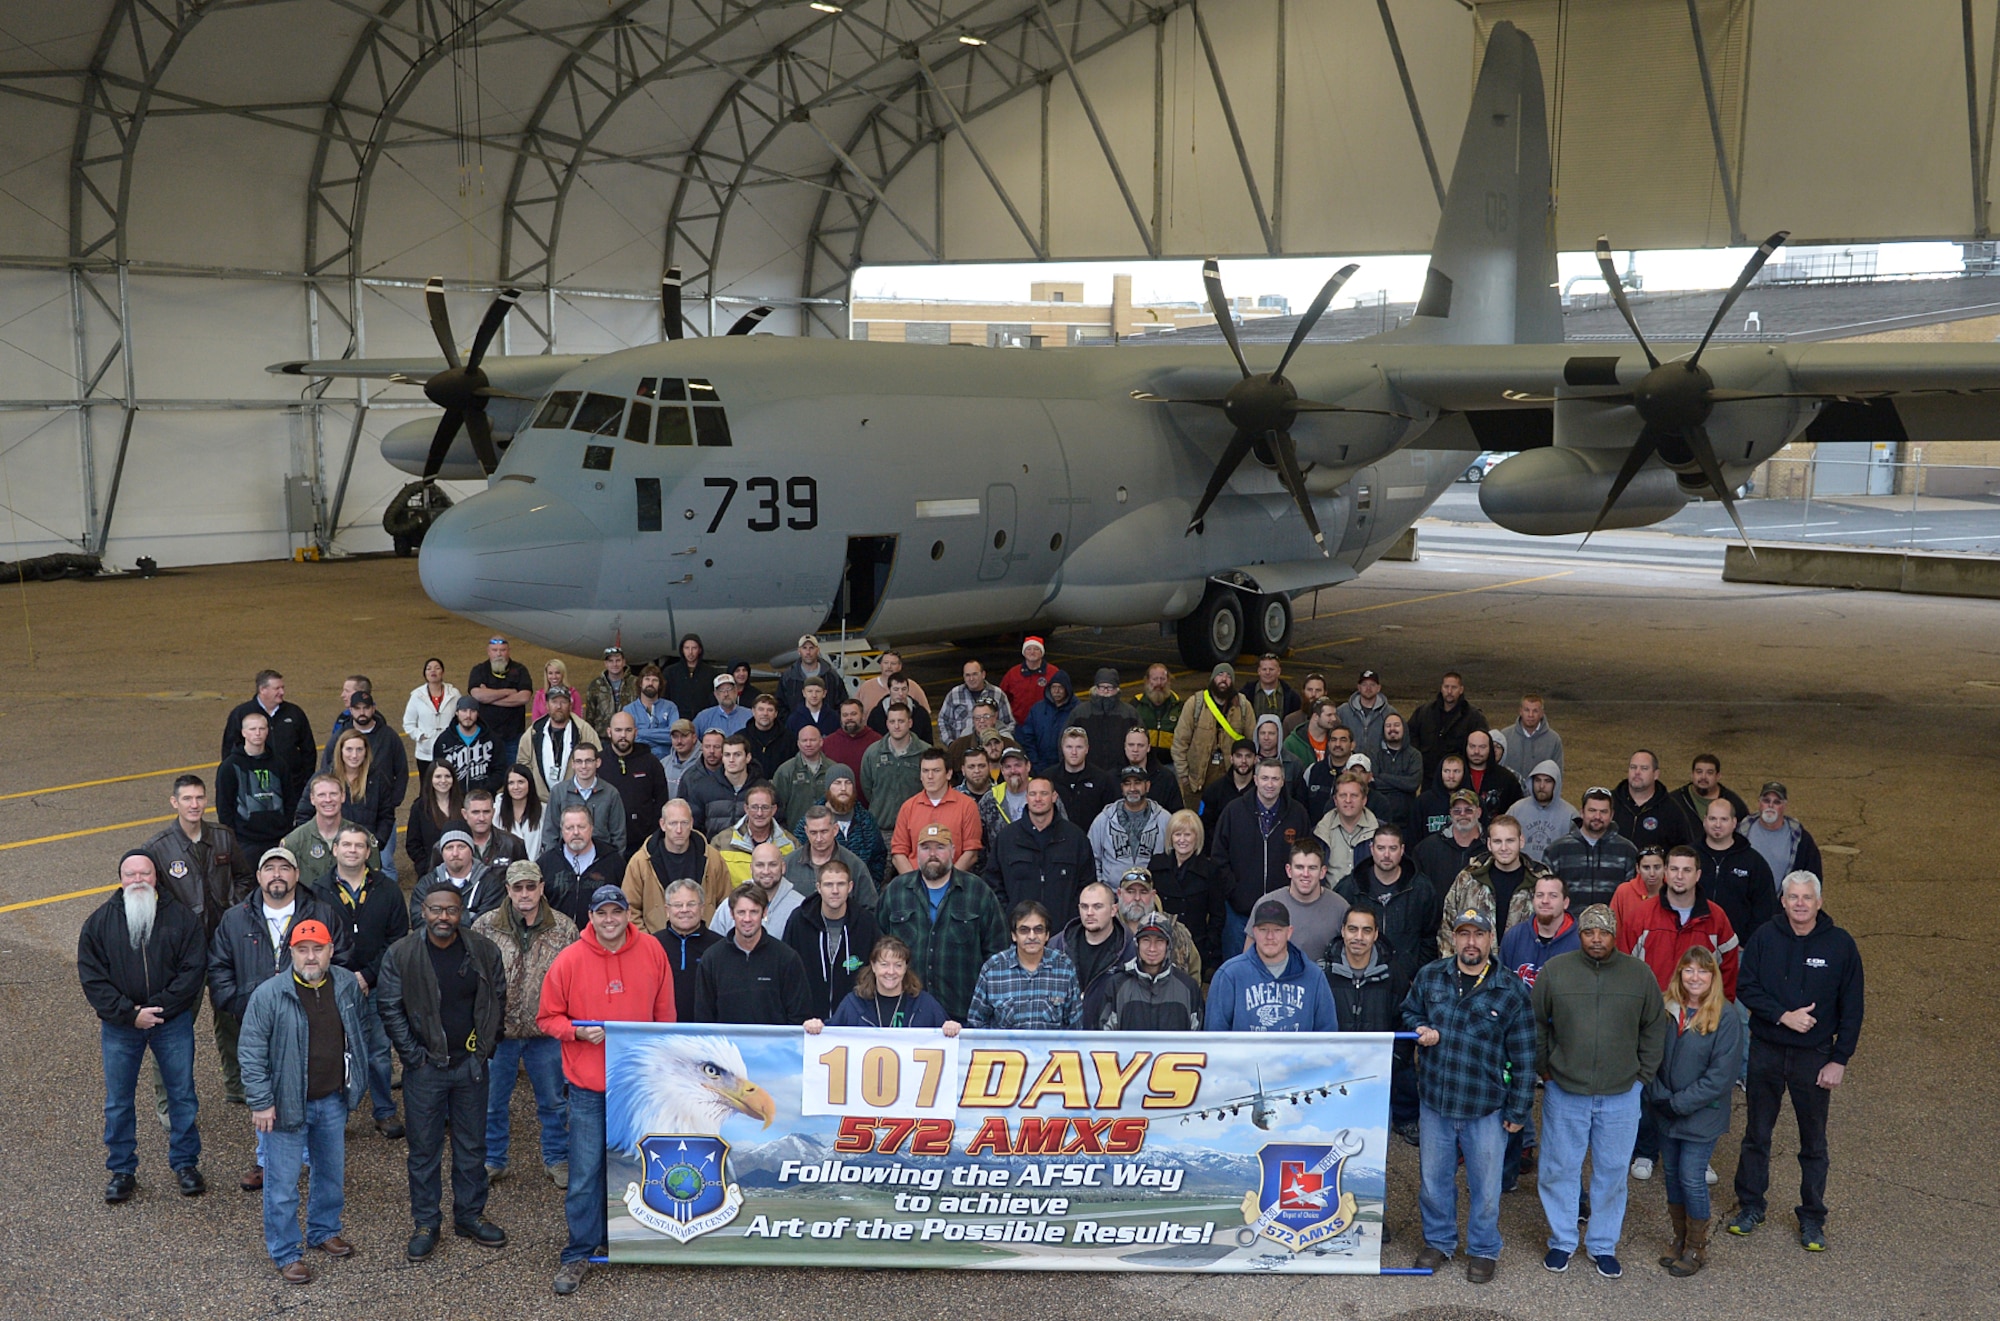 Members of the 572nd Maintenance Squadron at Hill Air Force Base, Utah, pose with a sign commemorating their record-breaking performance. The squadron used the Air Force Sustainment Center Way process to reduce the number of "flow days" of depot maintenance from 117 to 107. (Air Force photo by Alex R. Lloyd)